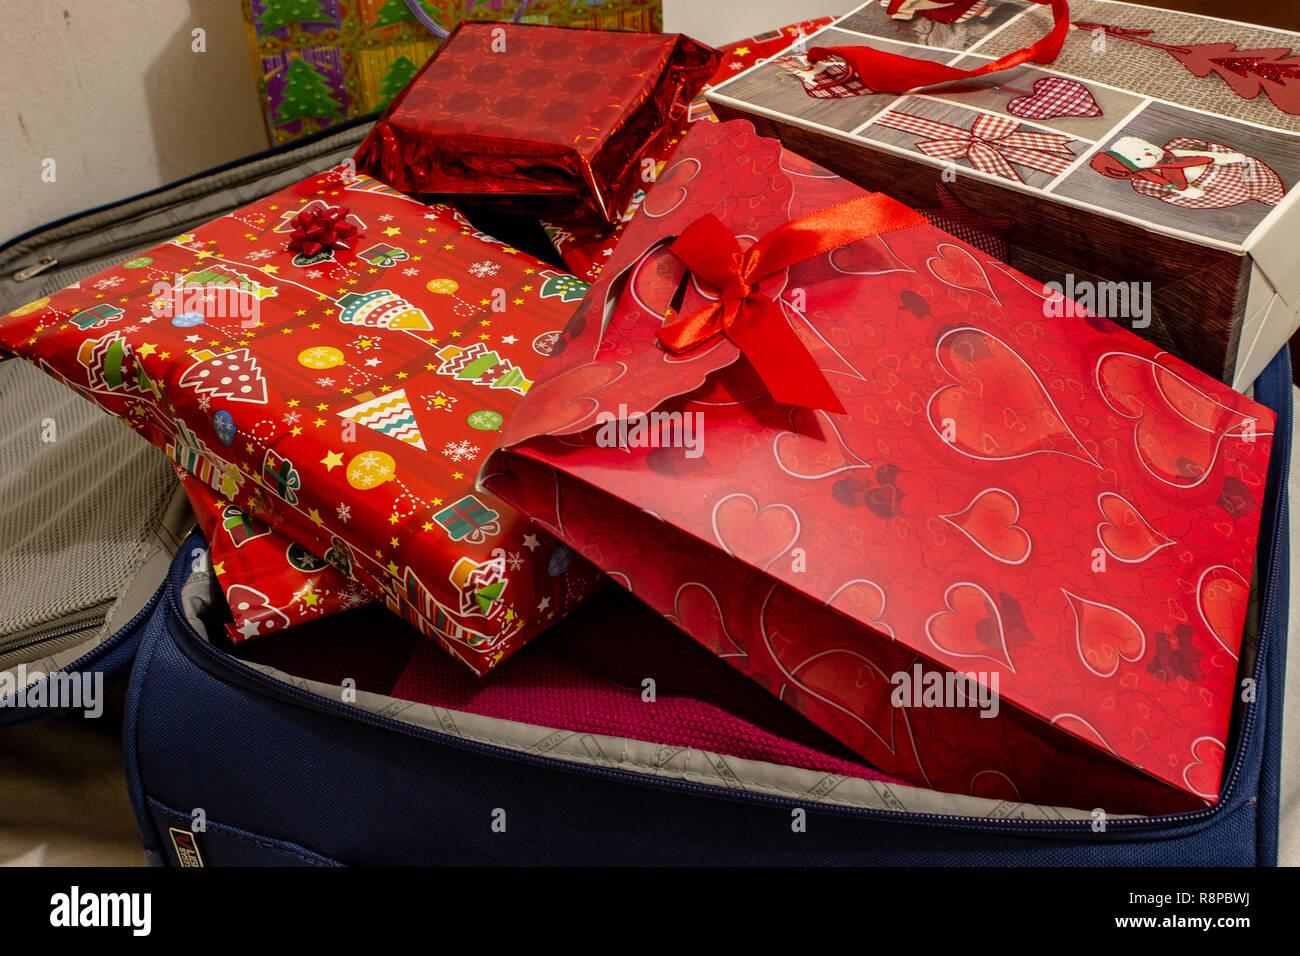 Return to the family home for the Christmas holidays, with a suitcase full of presents. Stock Photo